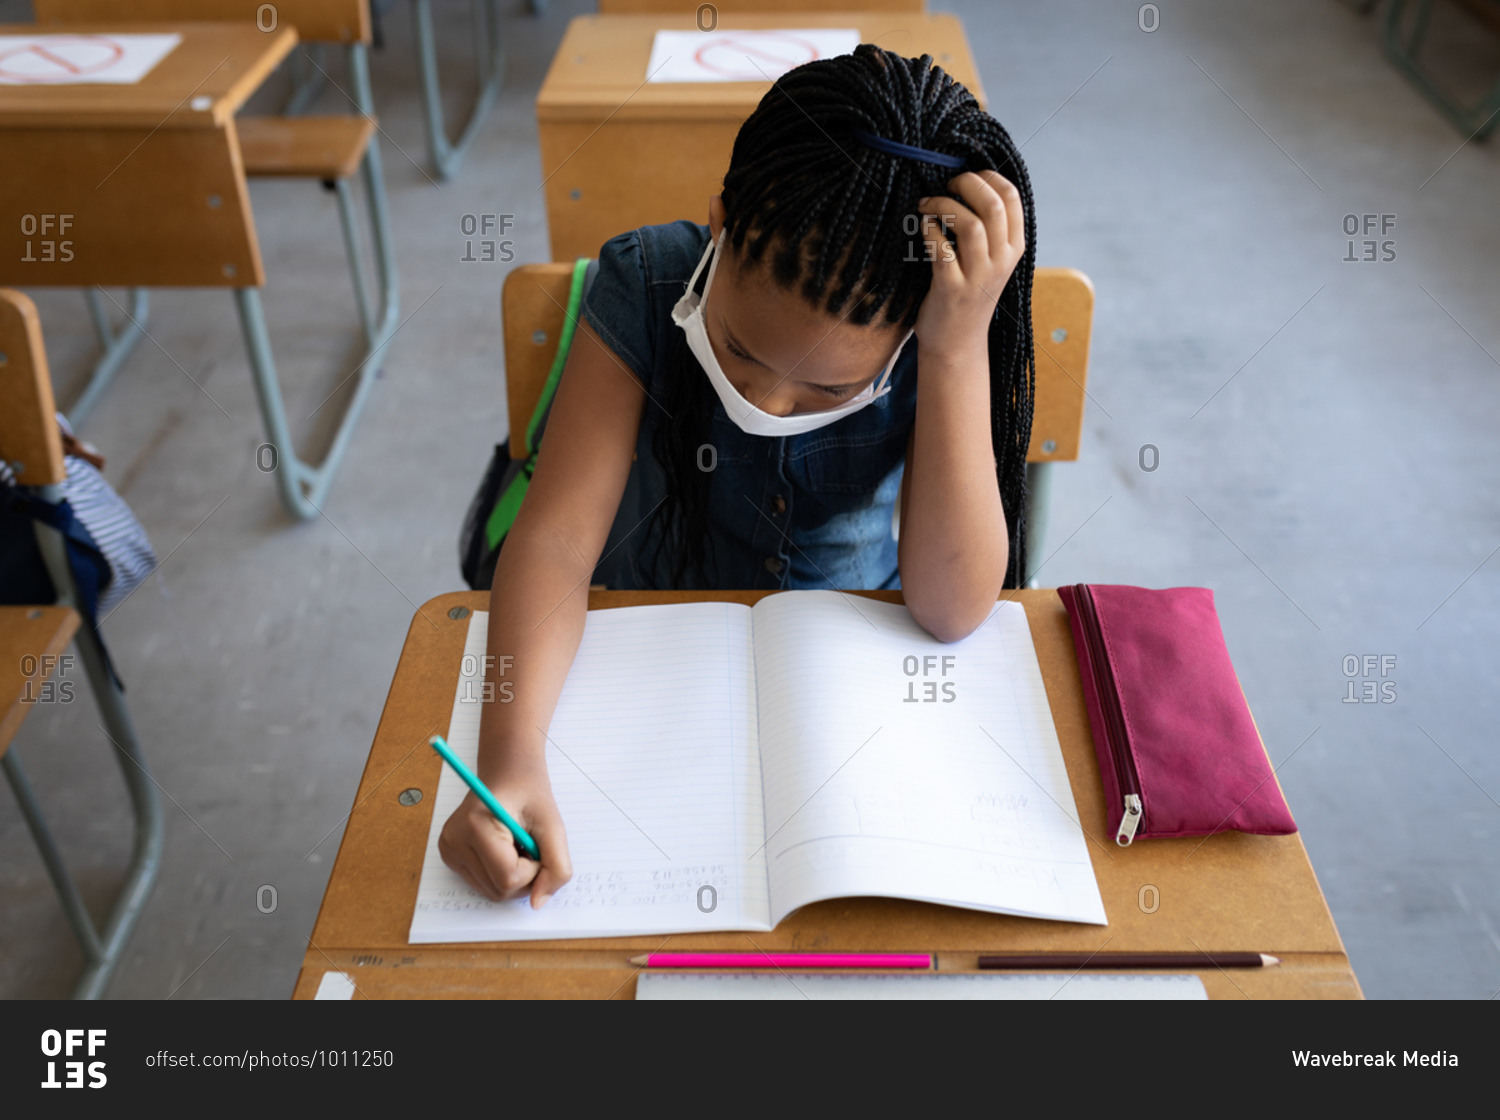 Overhead view of a mixed race girl wearing face mask writing while sitting on her desk in the classroom. Primary education social distancing health safety during Covid19 Coronavirus pandemic.